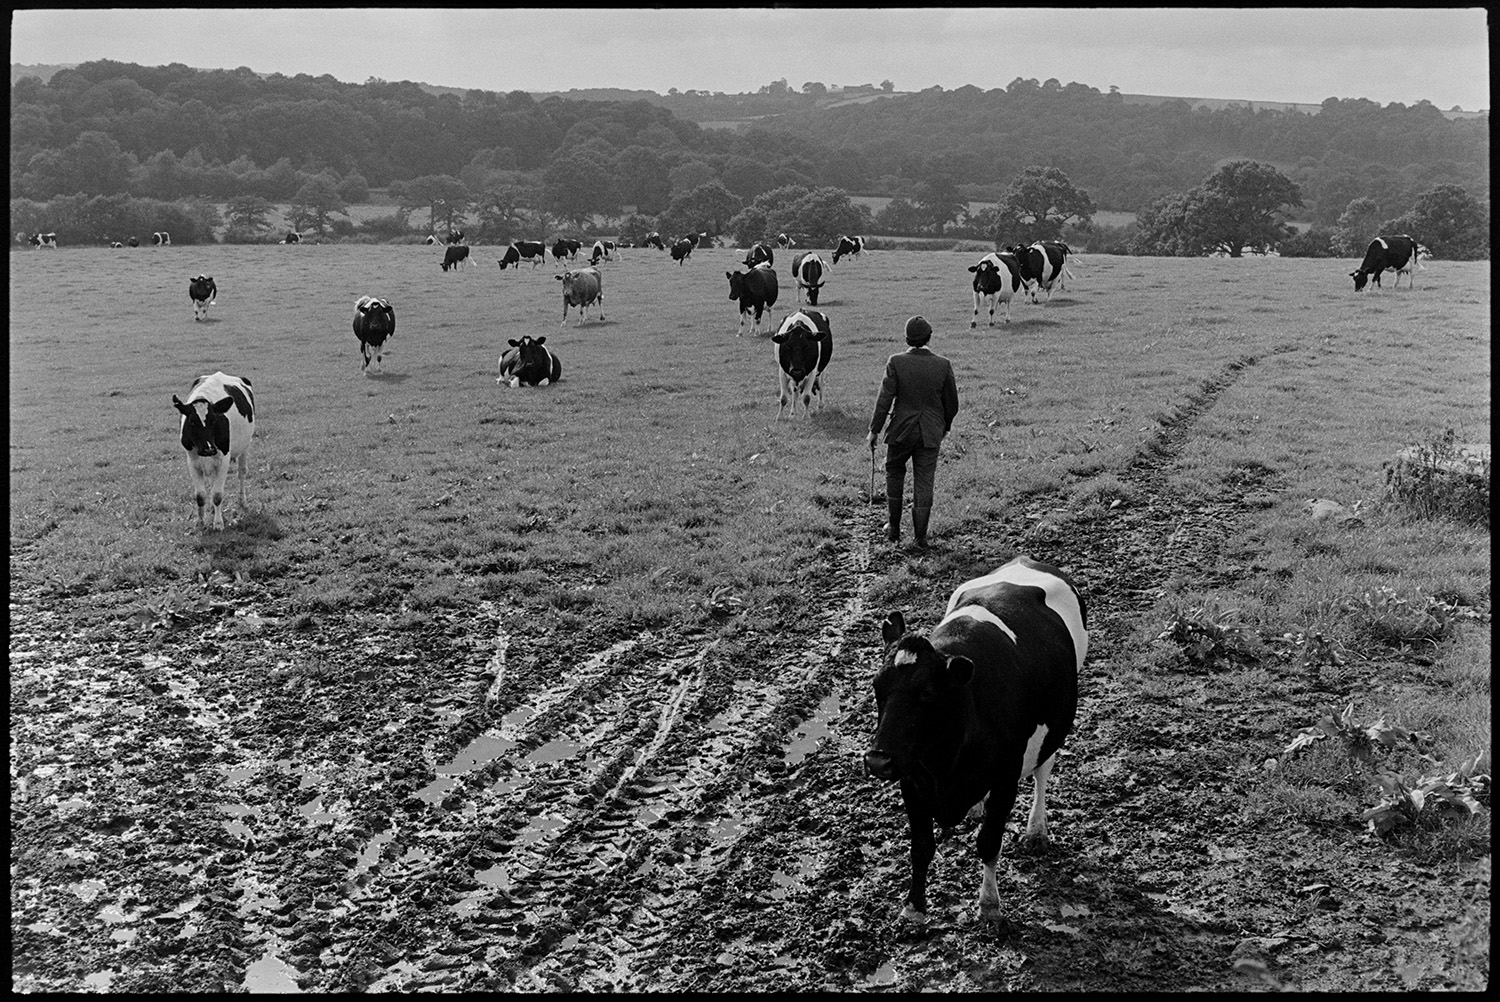 Cows coming in to be milked. 
[David Ward bringing in cows to be milked from a field at Nethercott, Iddesleigh. The herd of cattle are walking towards the field entrance and woodland can be seen in the background.]